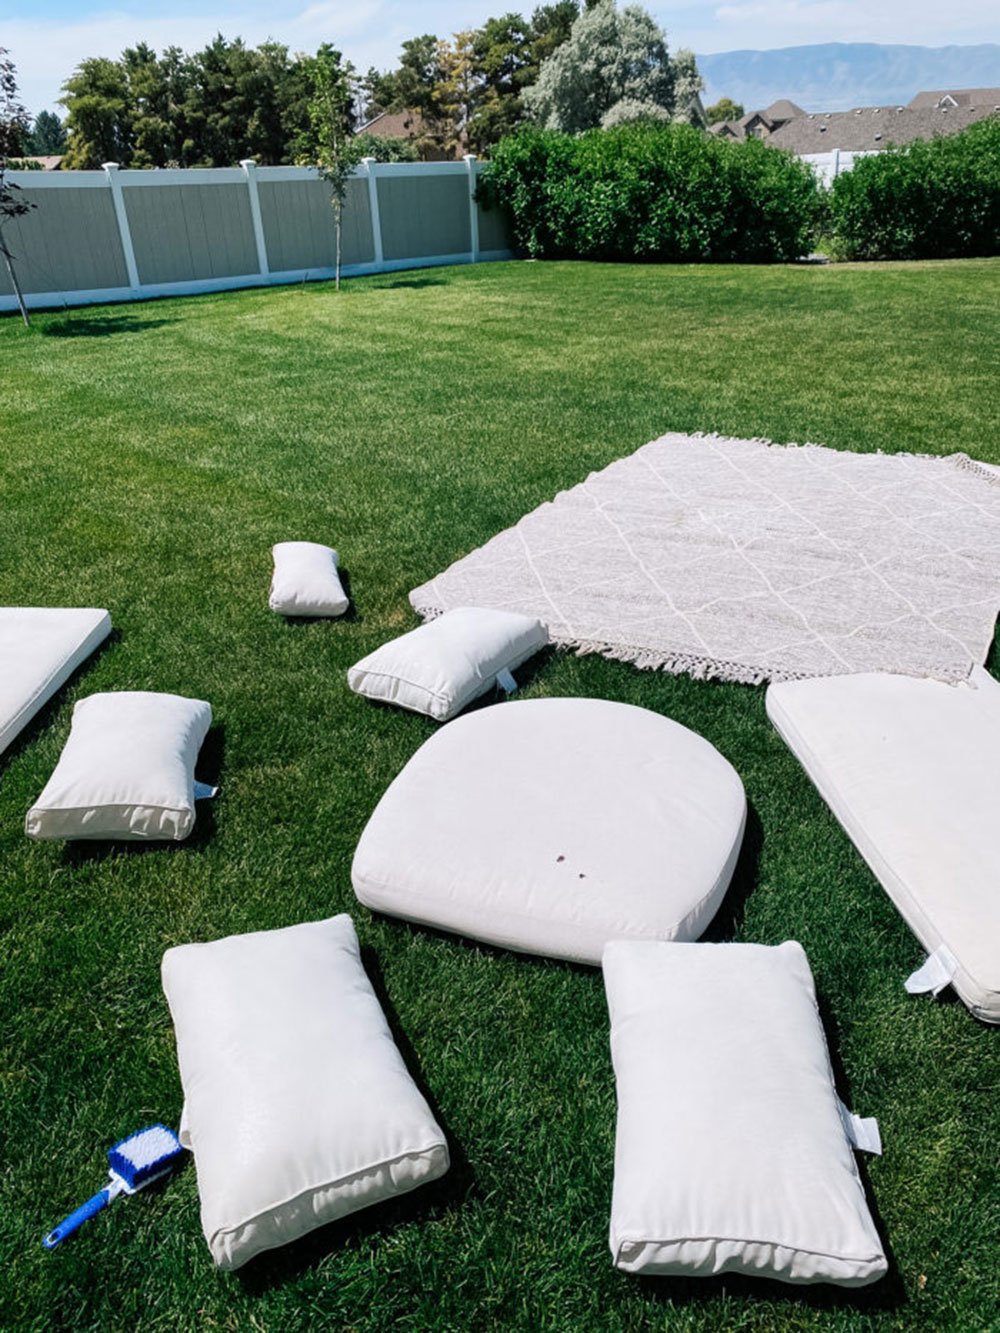 Wet-spray-the-cushions How to clean outdoor furniture cushions in a few steps